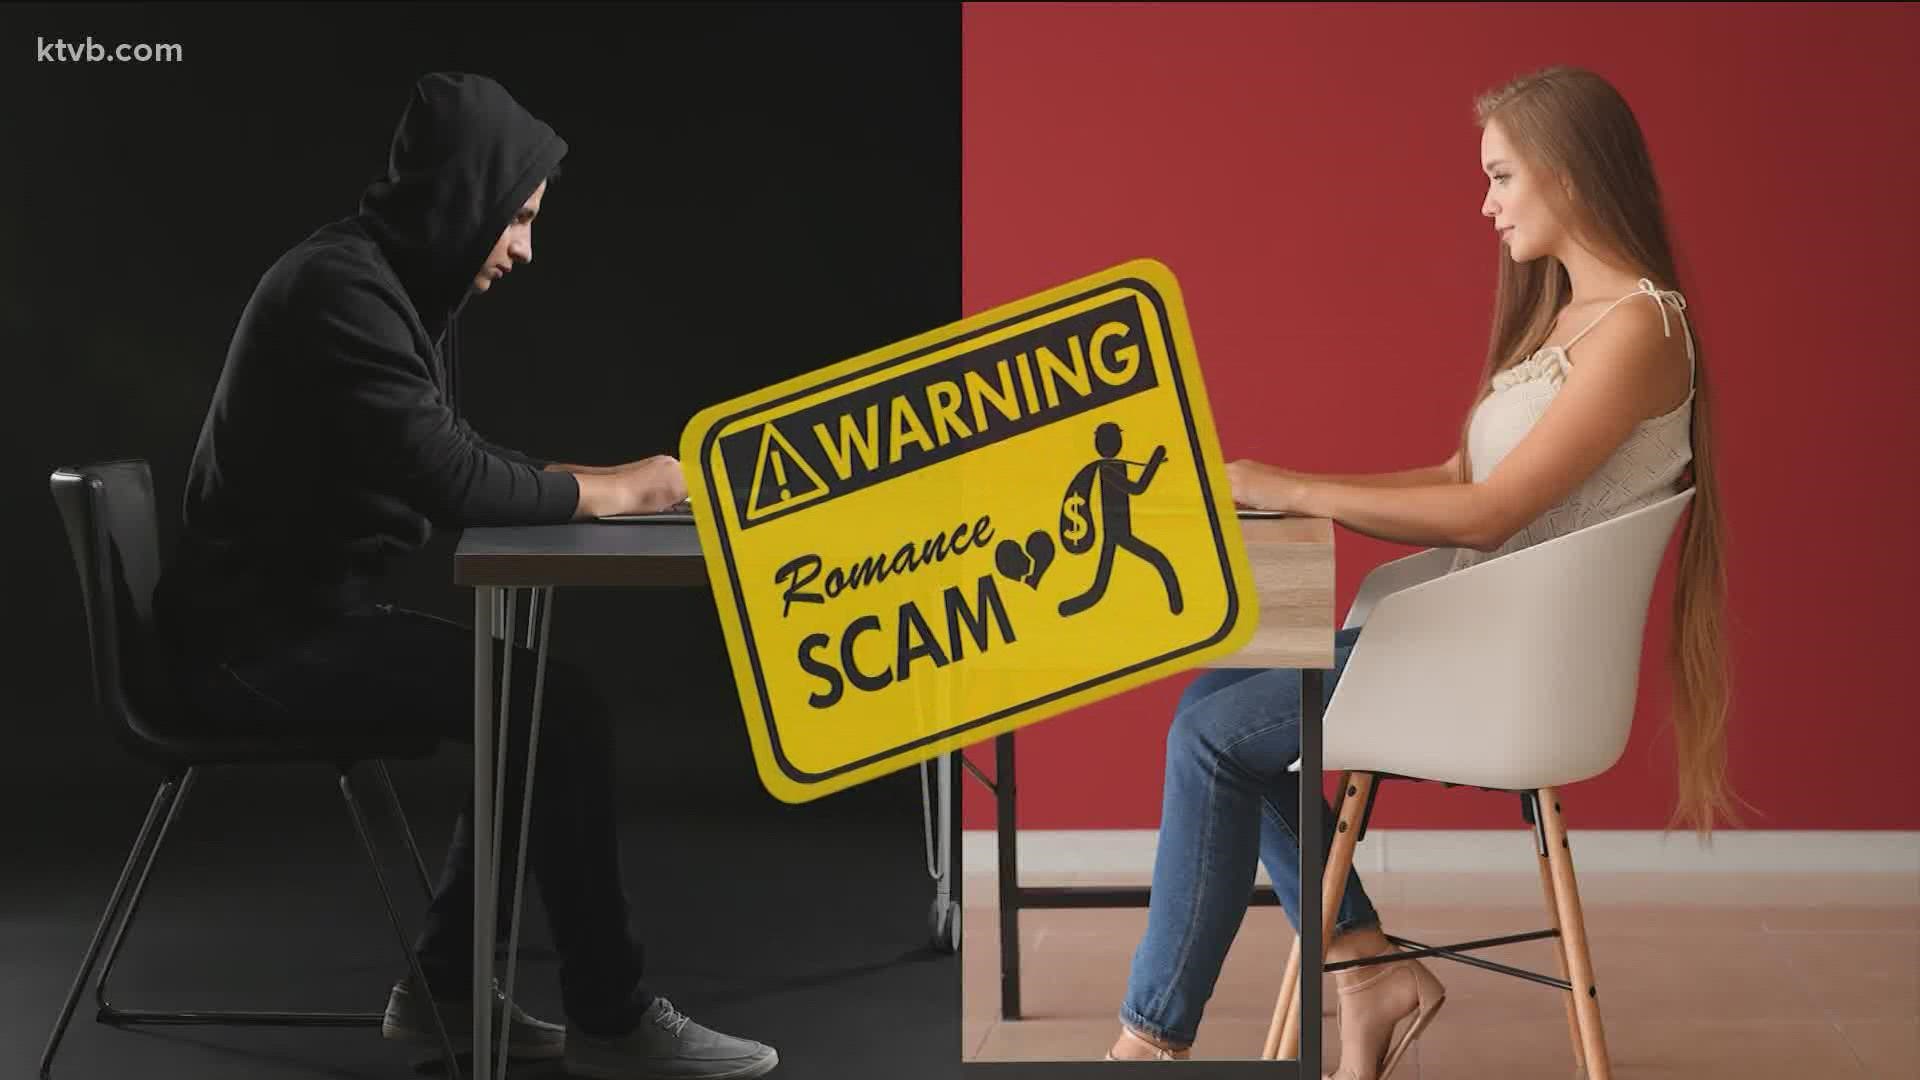 In 2020, 130 Idahoans reported losing more than $2 million in romance scams.